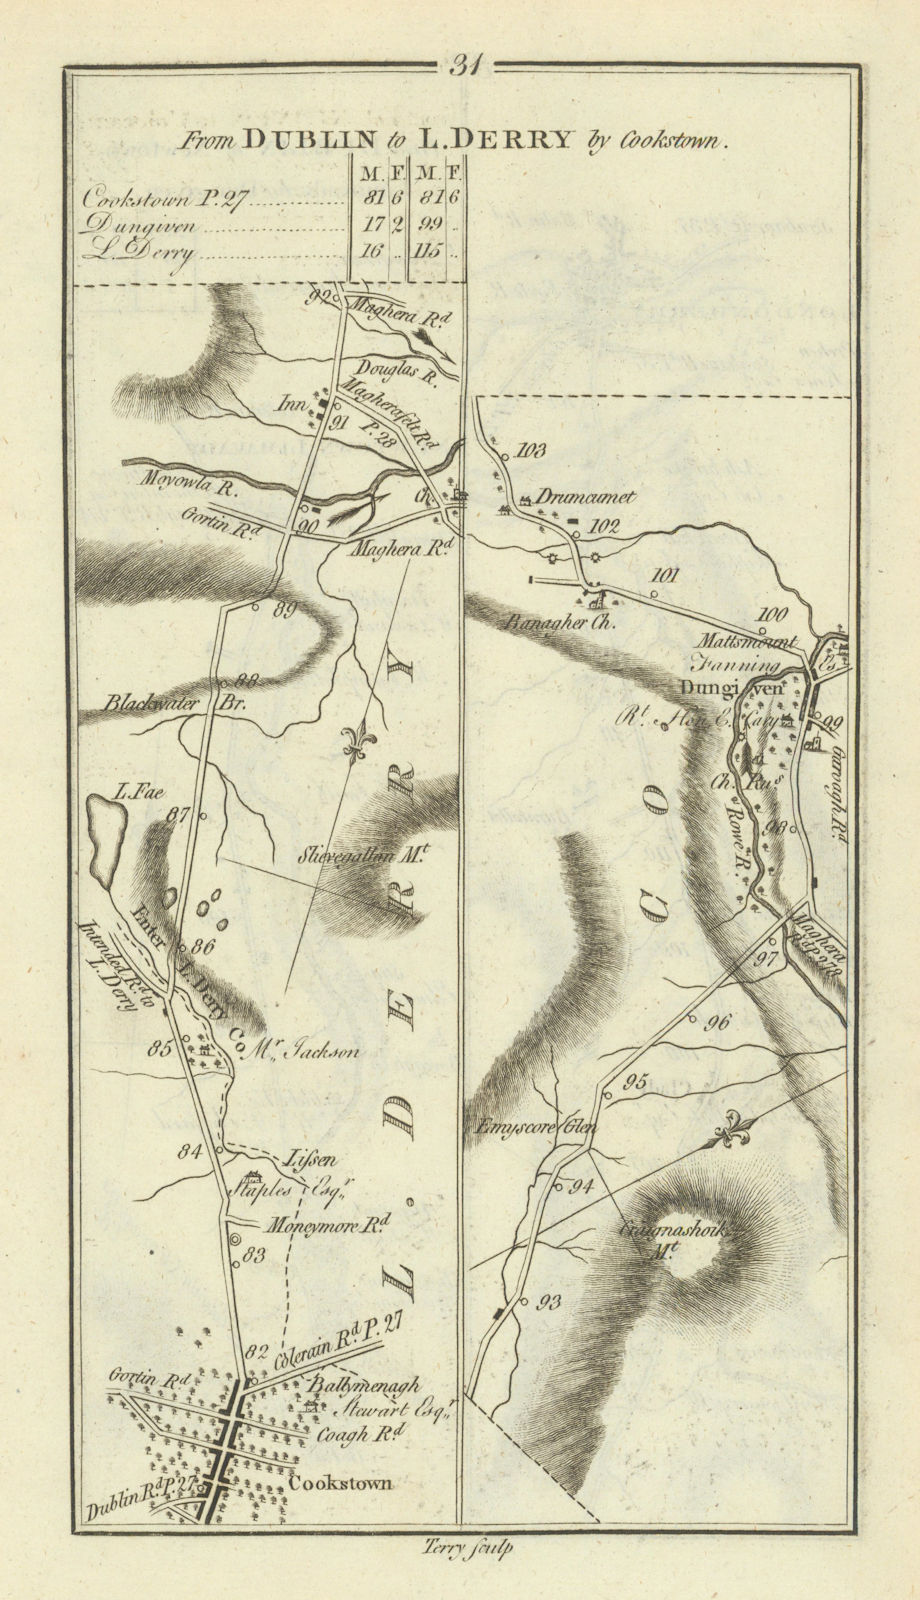 Associate Product #31 Dublin to Londonderry by Cookstown. Dungiven Tyrone. TAYLOR/SKINNER 1778 map